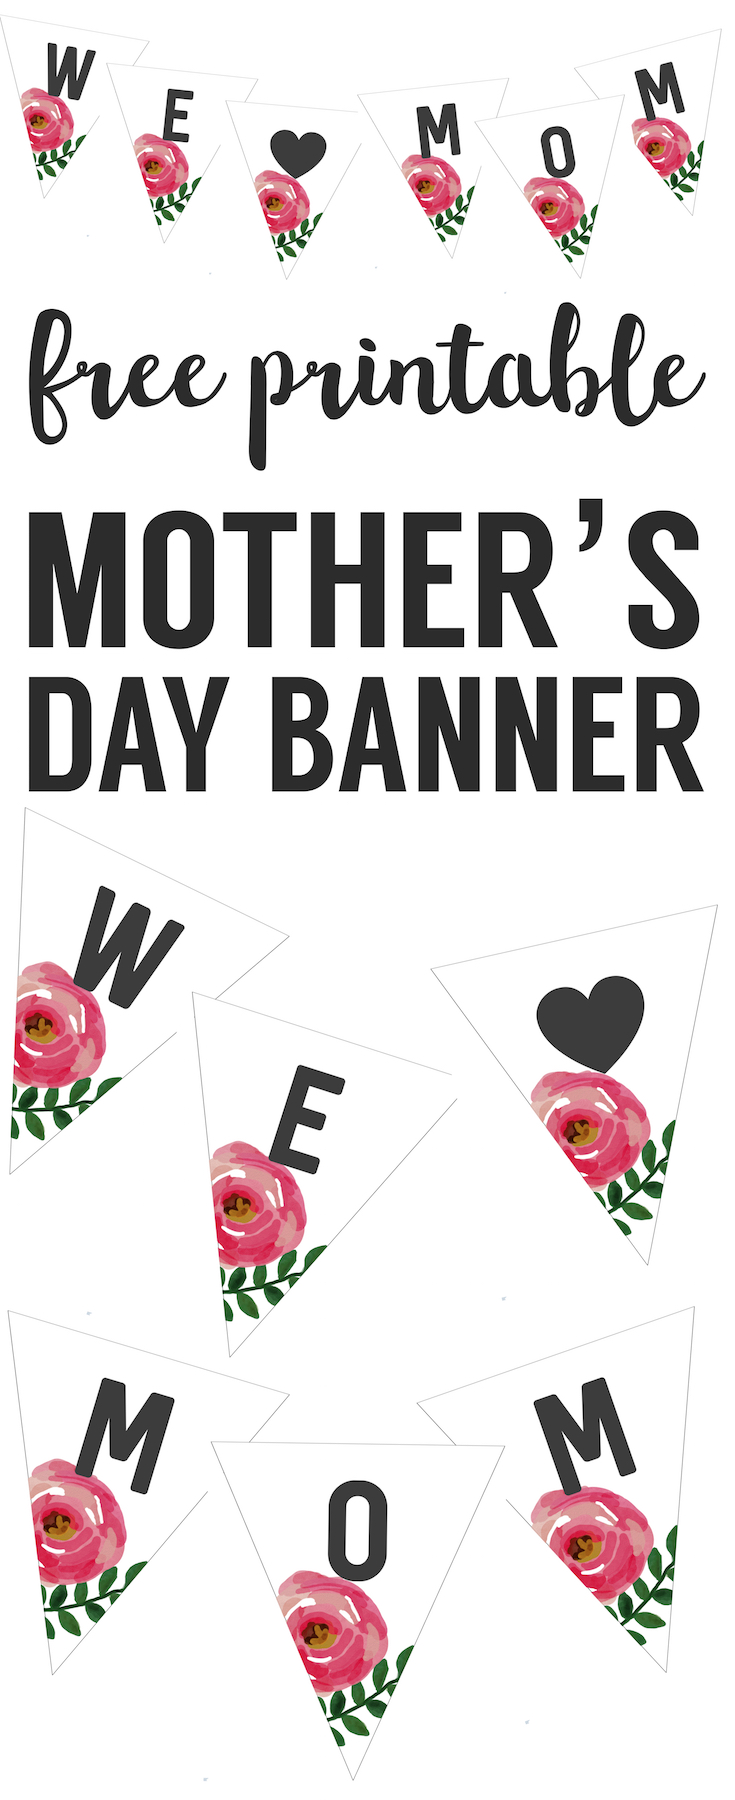 Mother's Day Banner Free Printable. Print this I heart mom DIY flower banner decoration for your mom or wife this Mother's Day. Mother's Day decor. Mother's Day free printables.